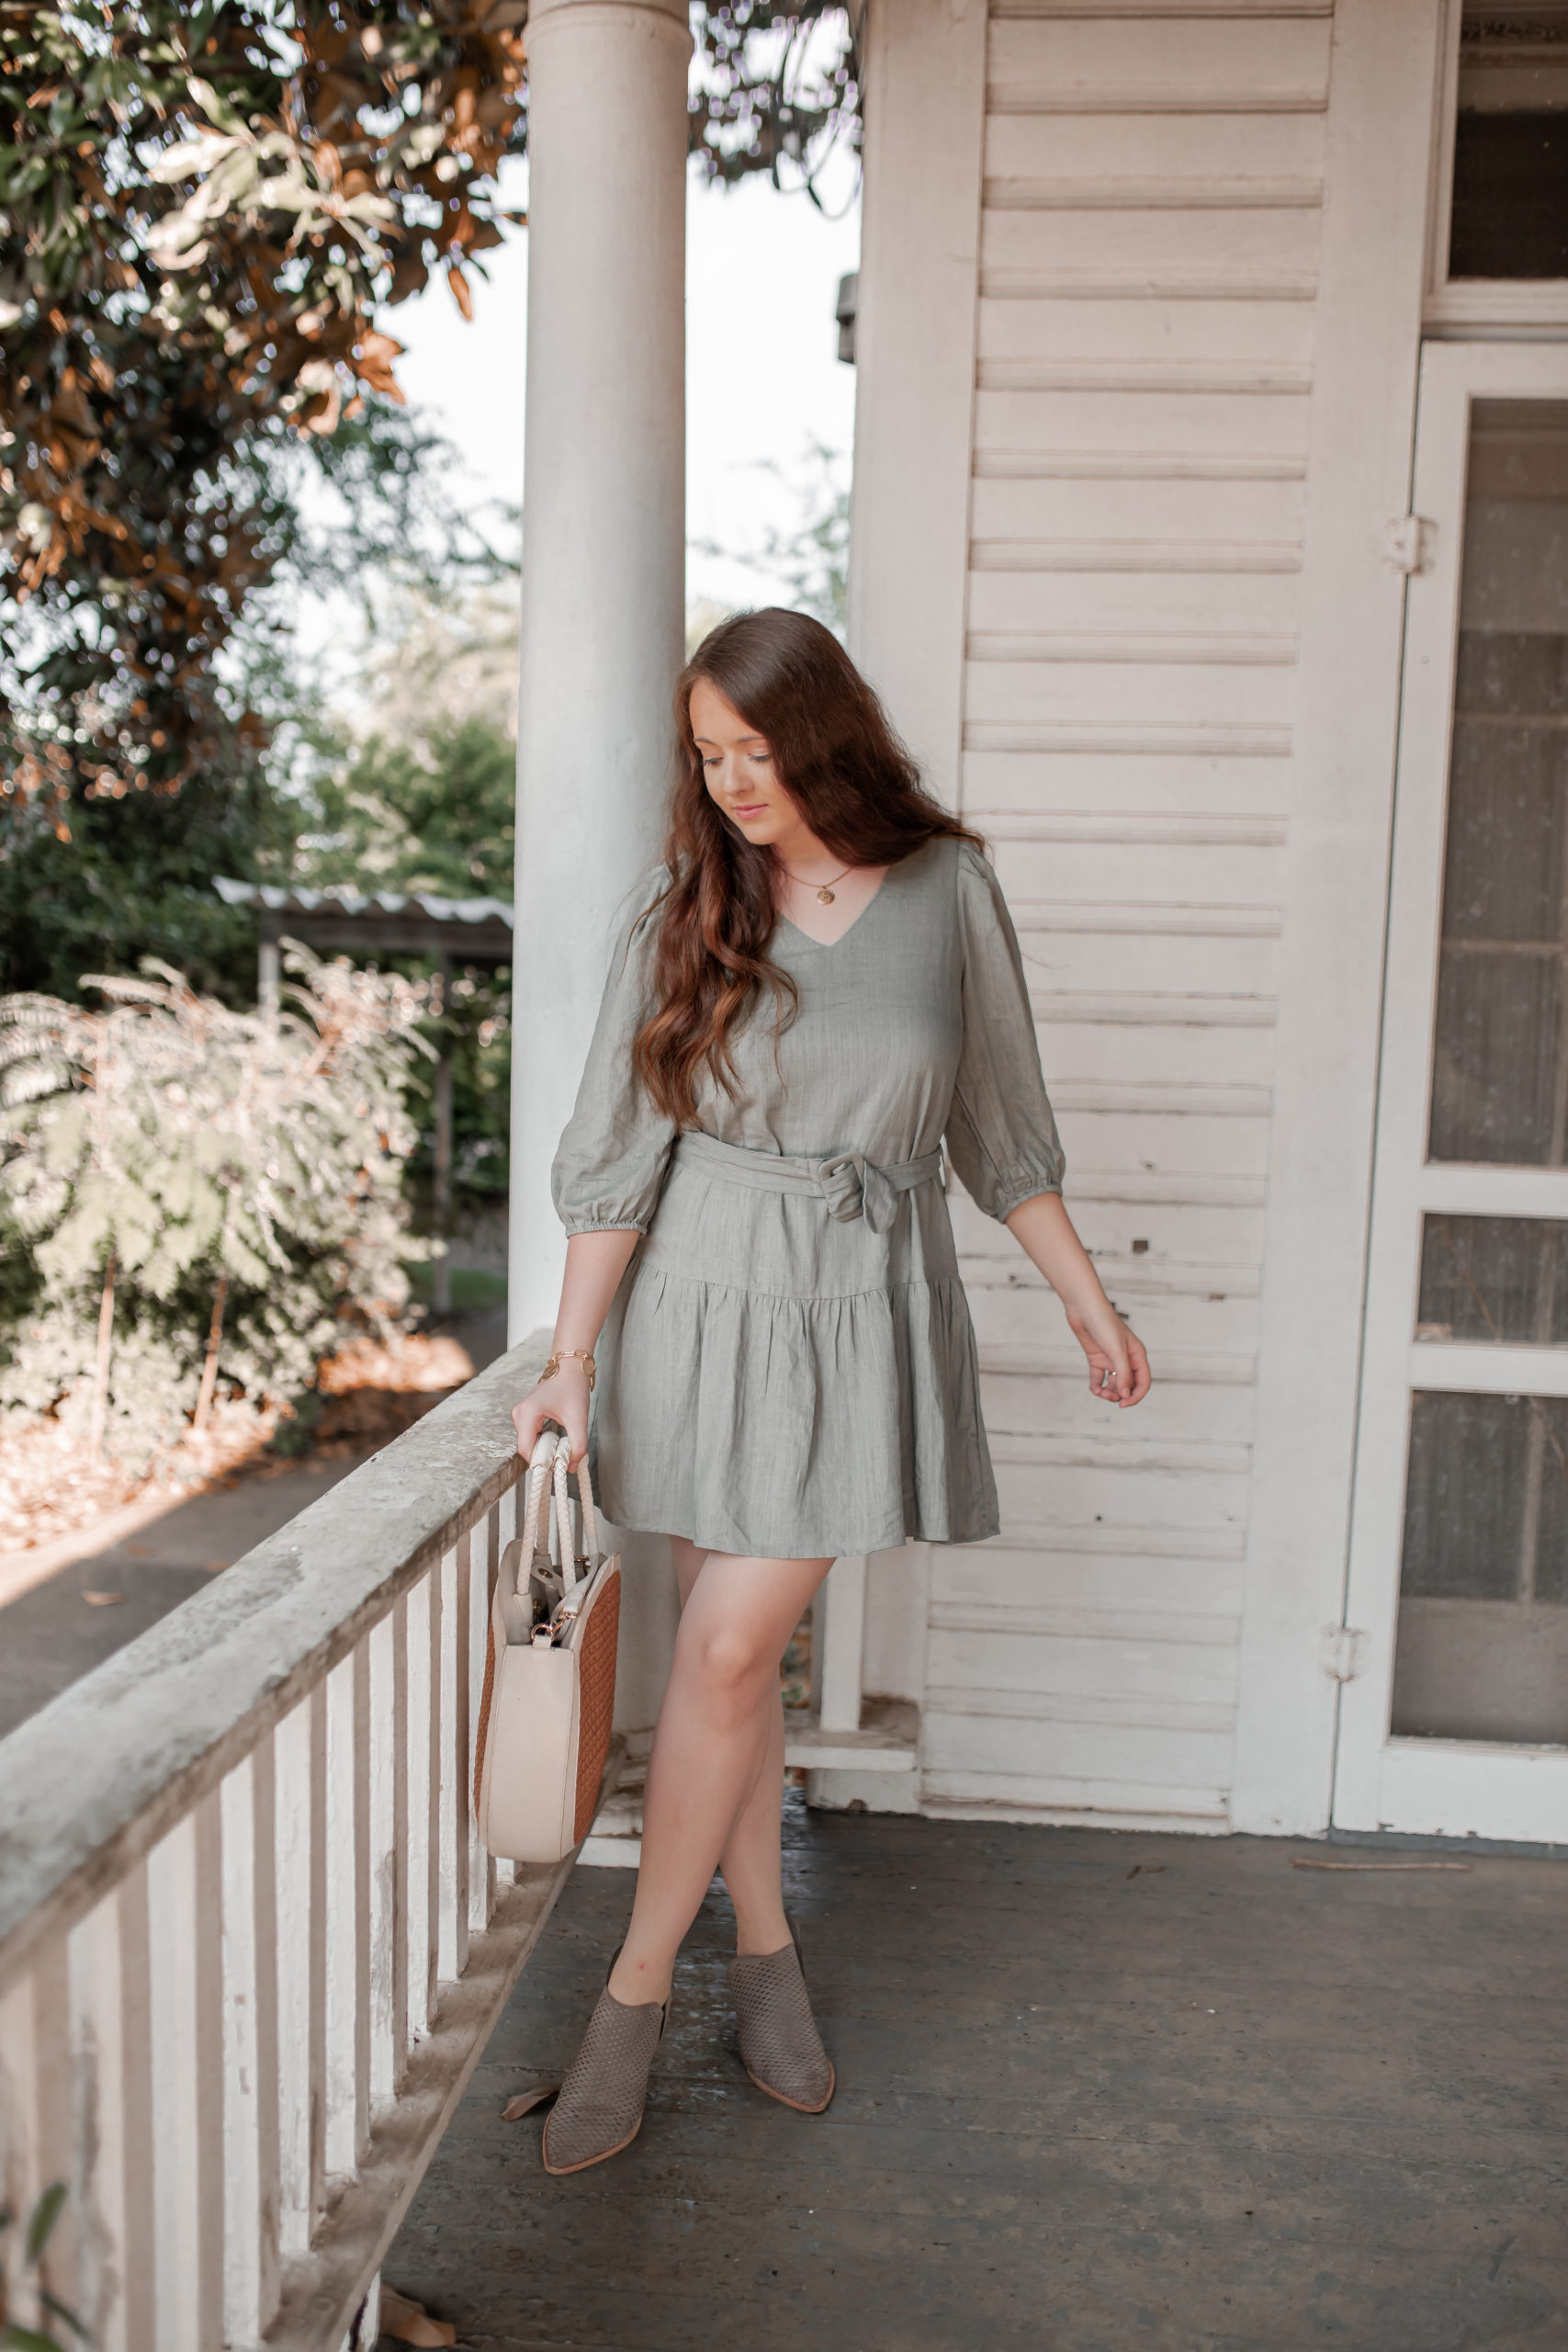 A Mossy Green Dress To Wear Now Into Fall! - Simply Stylish